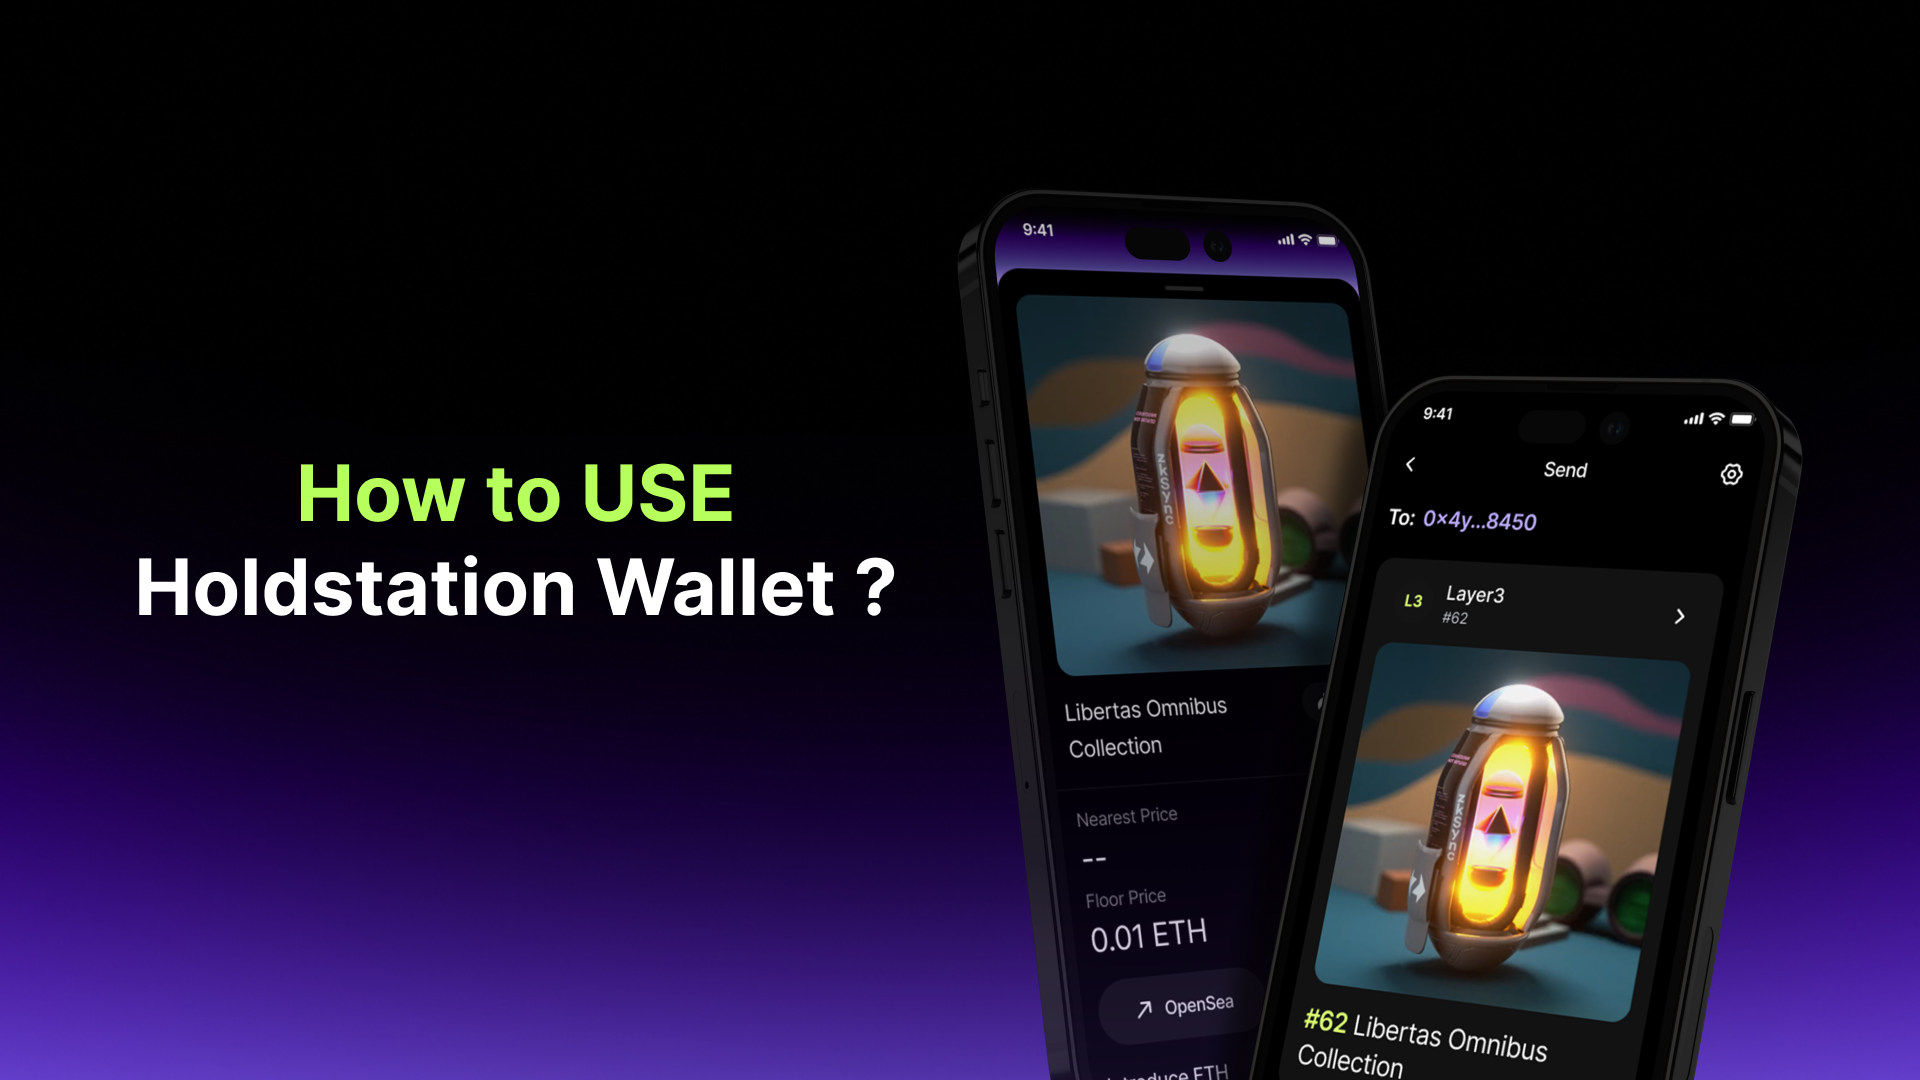 How To Use Your Holdstation Wallet?